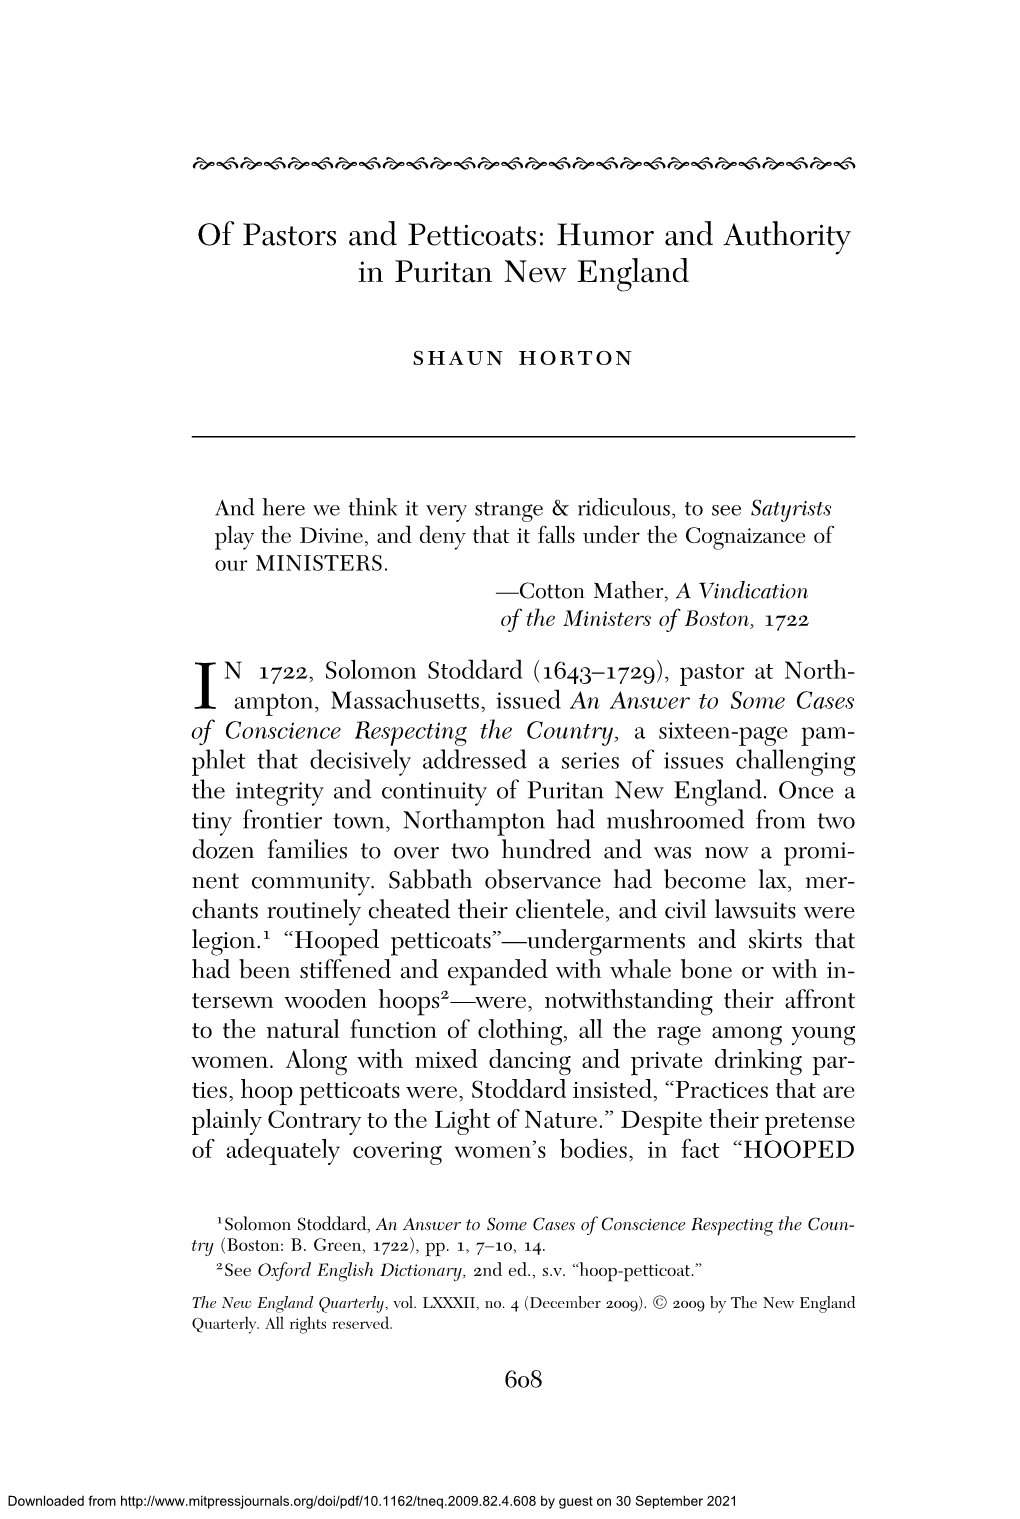 Of Pastors and Petticoats: Humor and Authority in Puritan New England